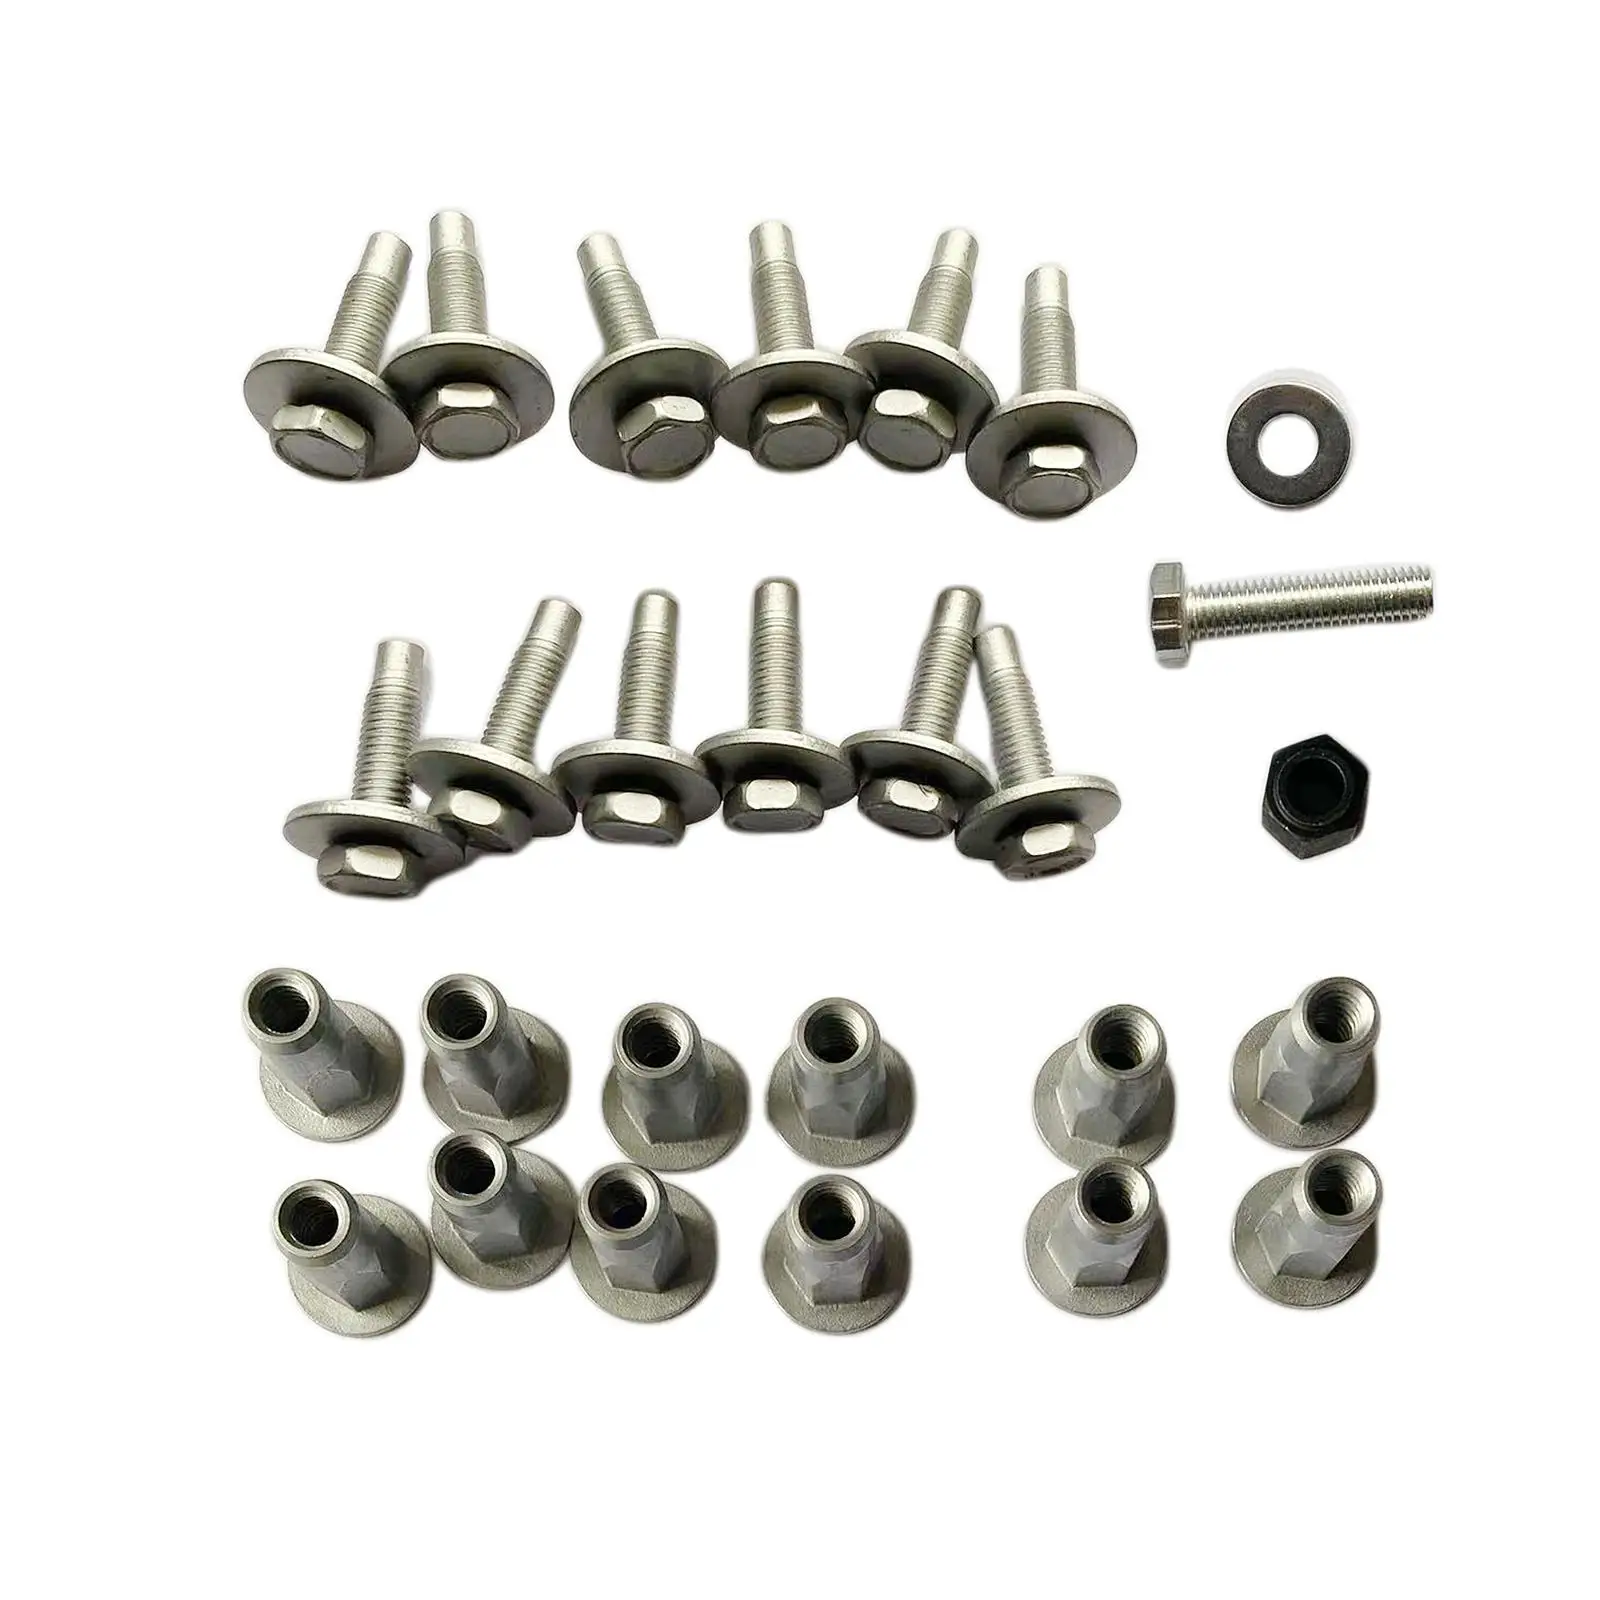 27pcs Car Sidestep Mounting Kit Iron Nuts Bolts Set for Dodge RAM 1500 2500 3500 Modification Direct Replaces Accessory